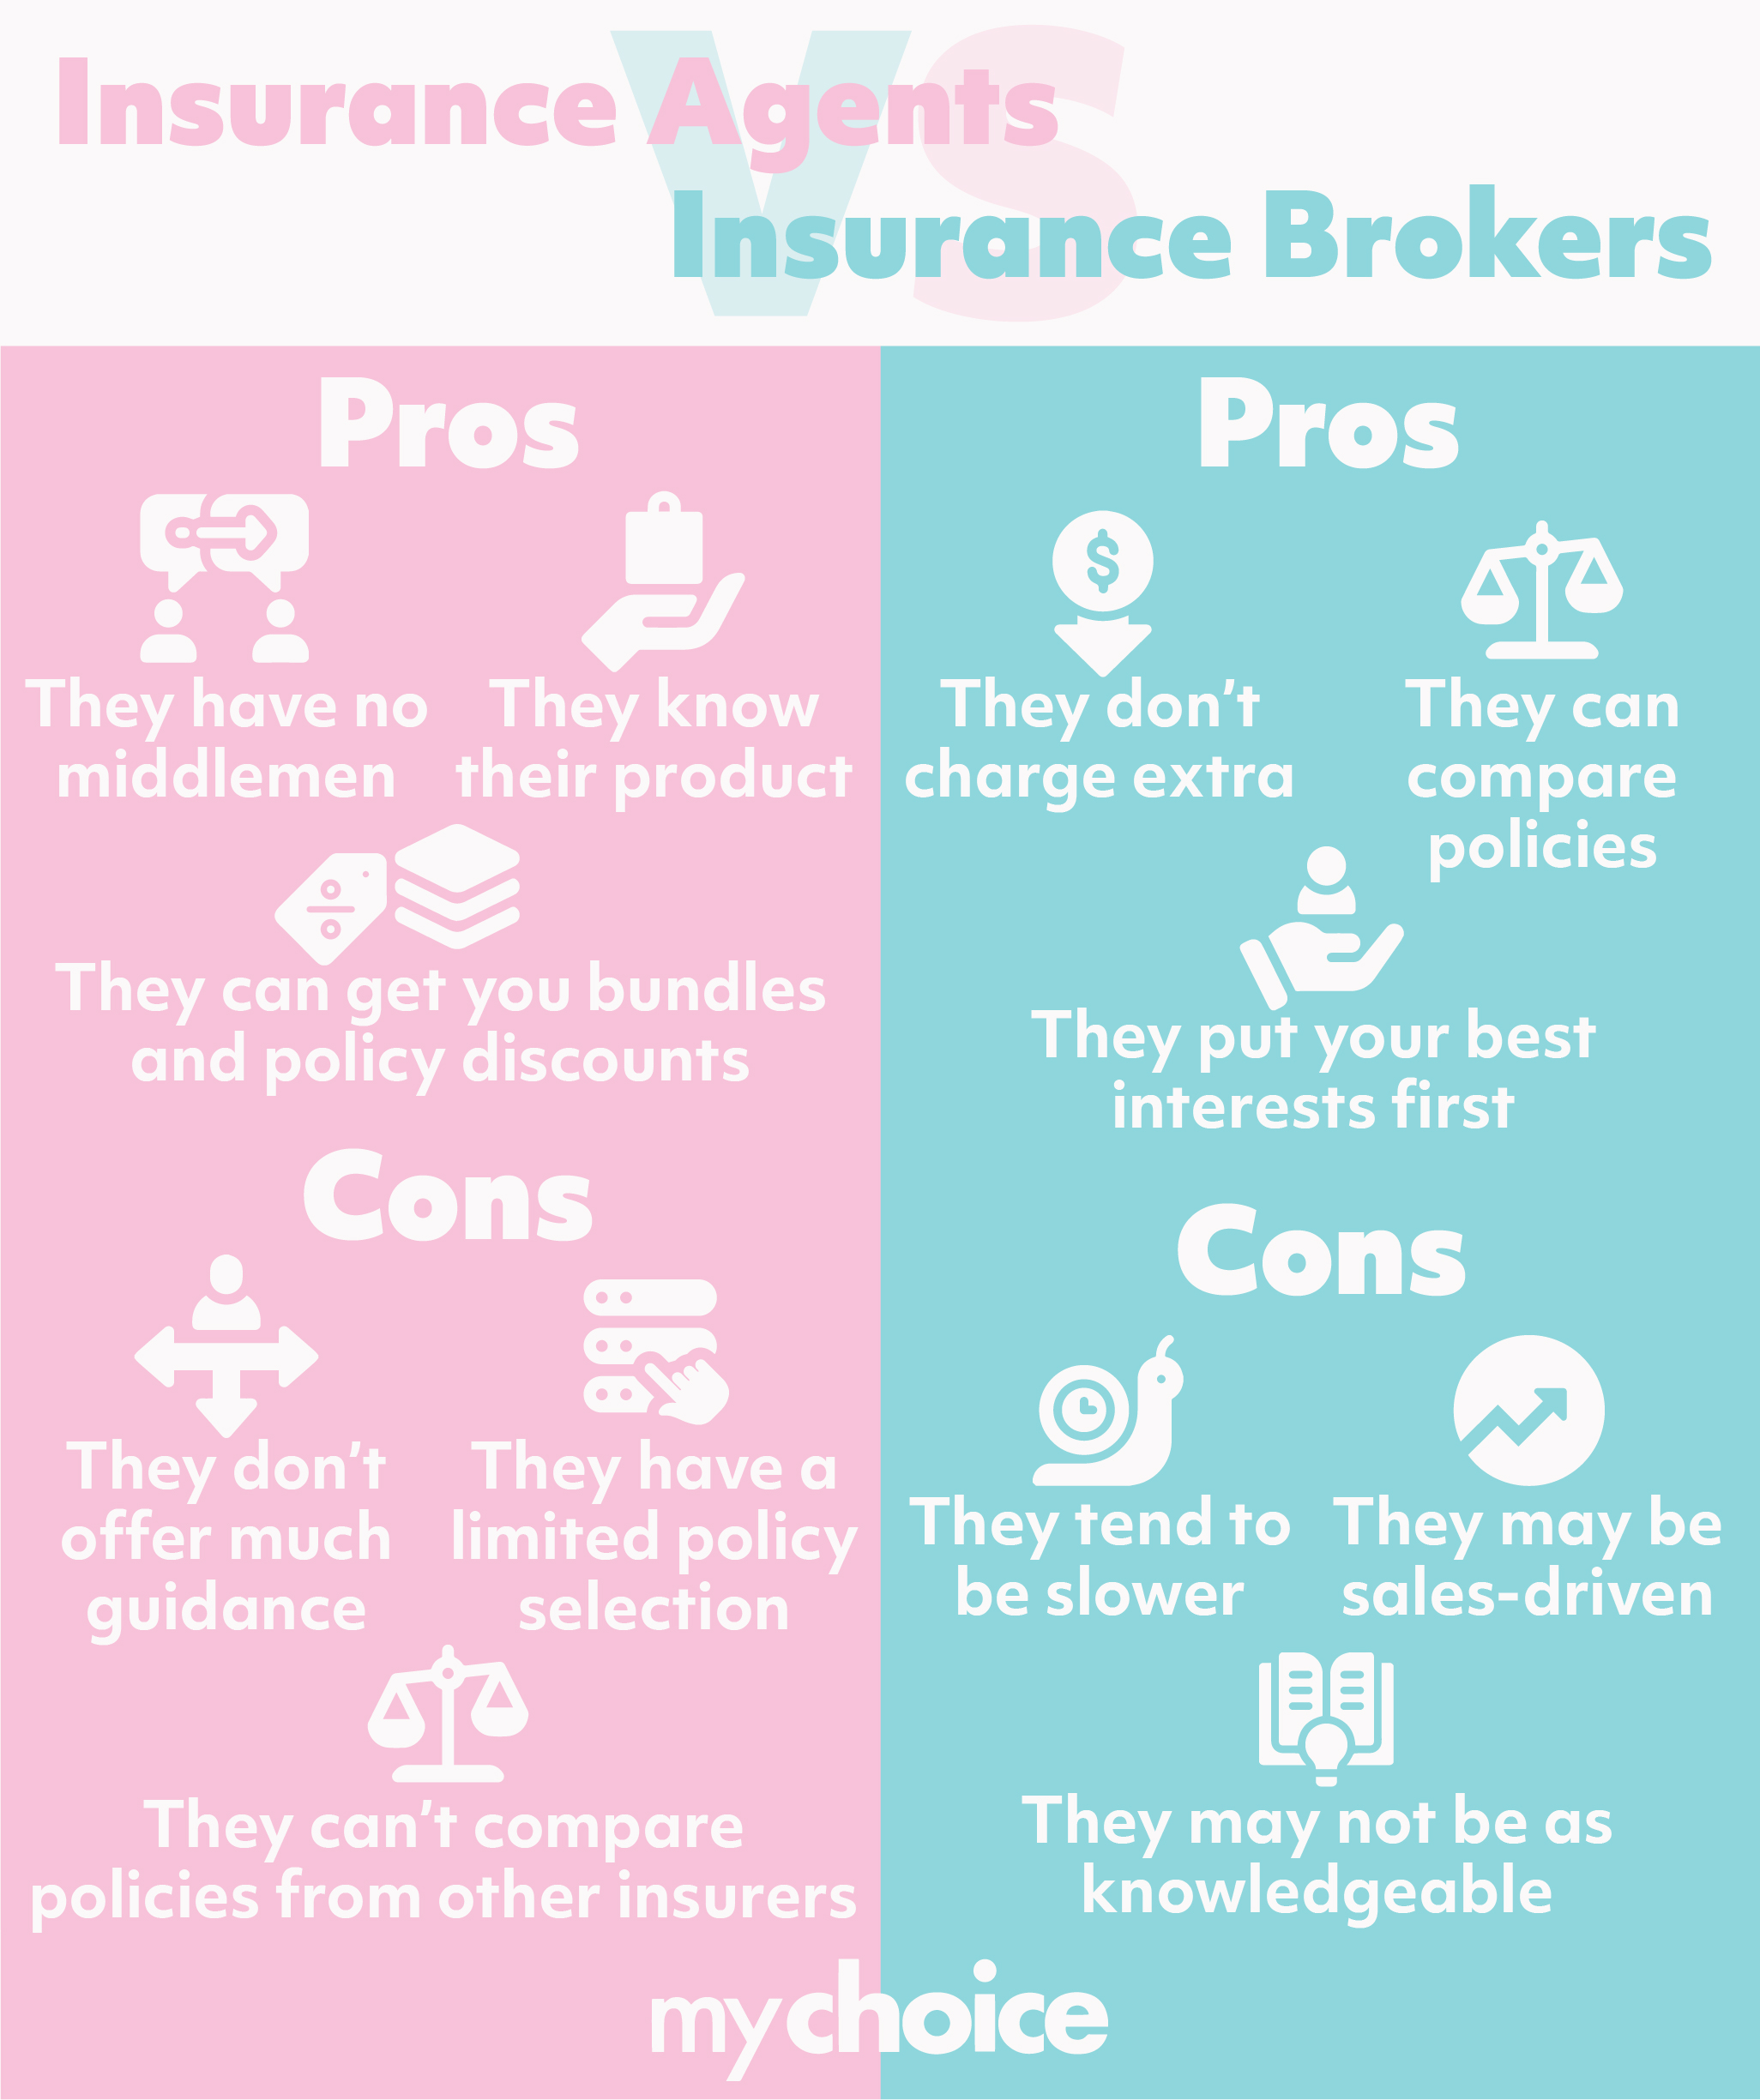 Insurance Agent vs. Insurance Broker: What's the Difference?